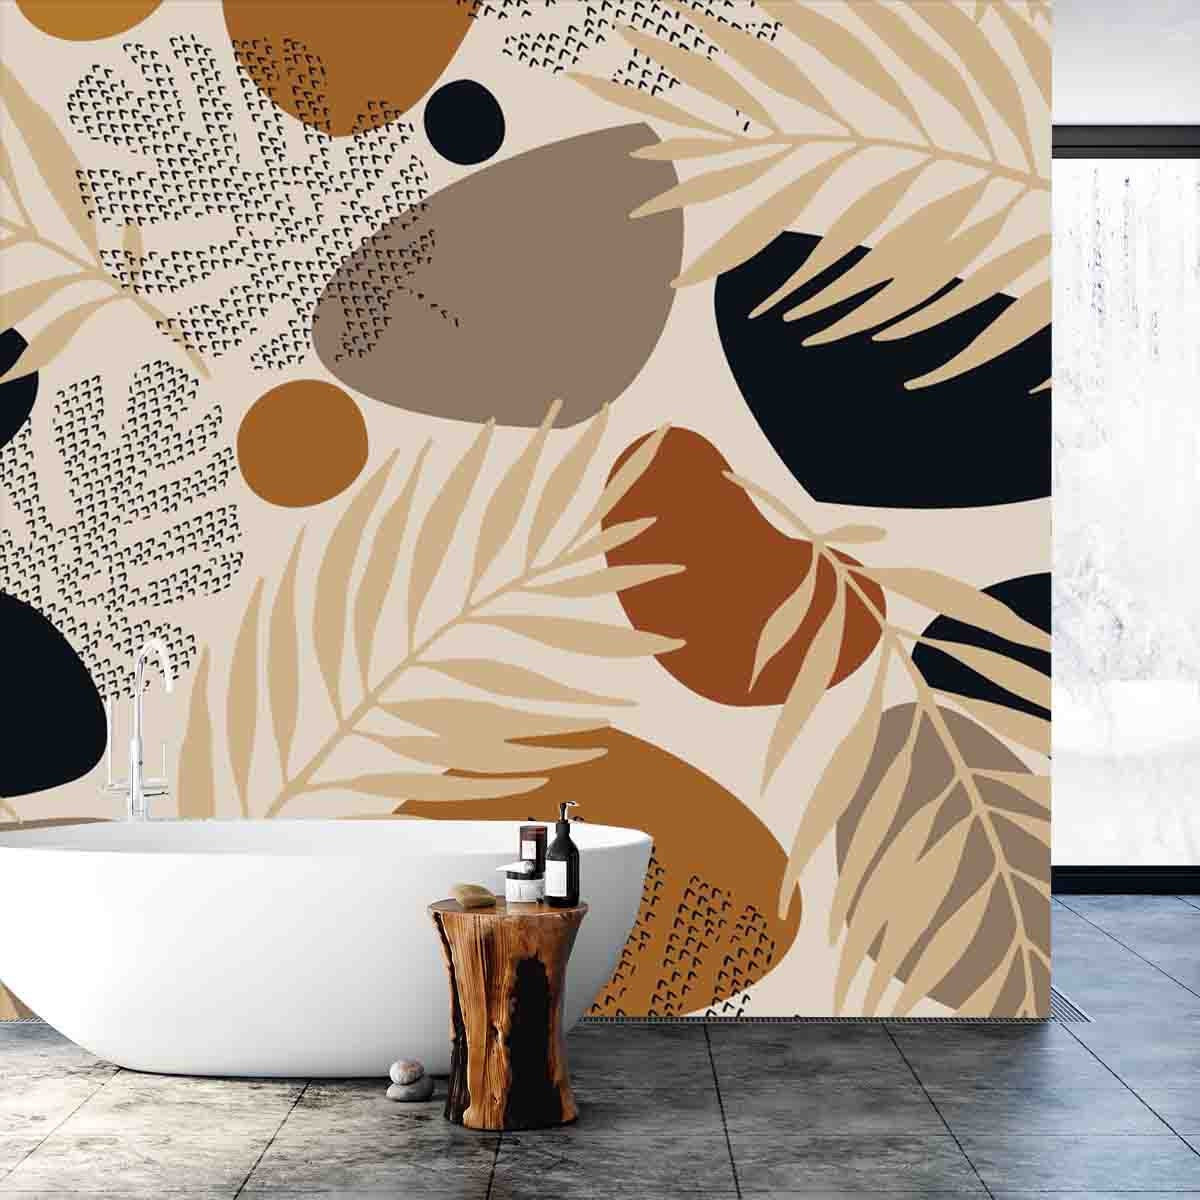 Abstract Geometric, Natural Shapes in Minimal Nordic Style Wallpaper Bathroom Mural